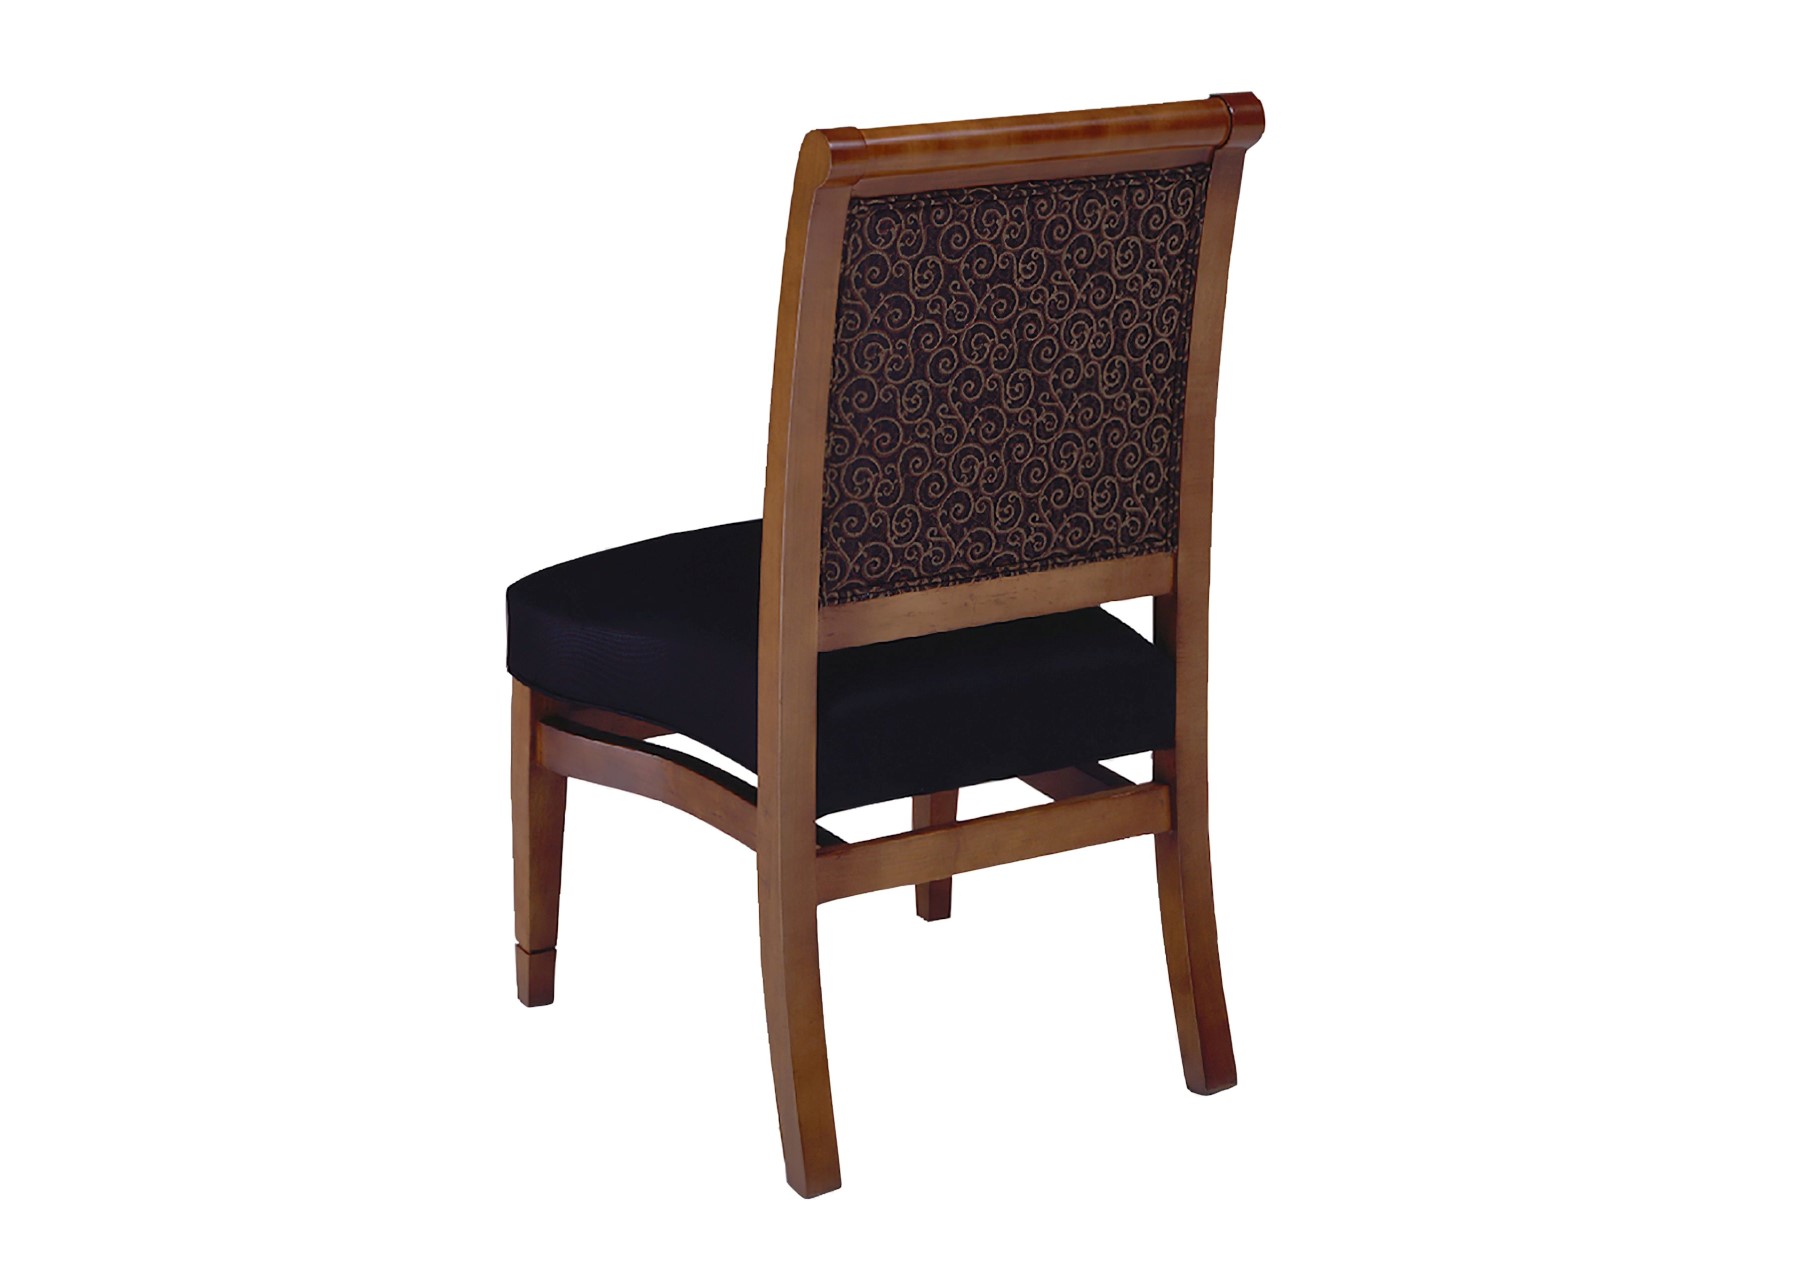  BEDFORD STACKING SIDE CHAIR